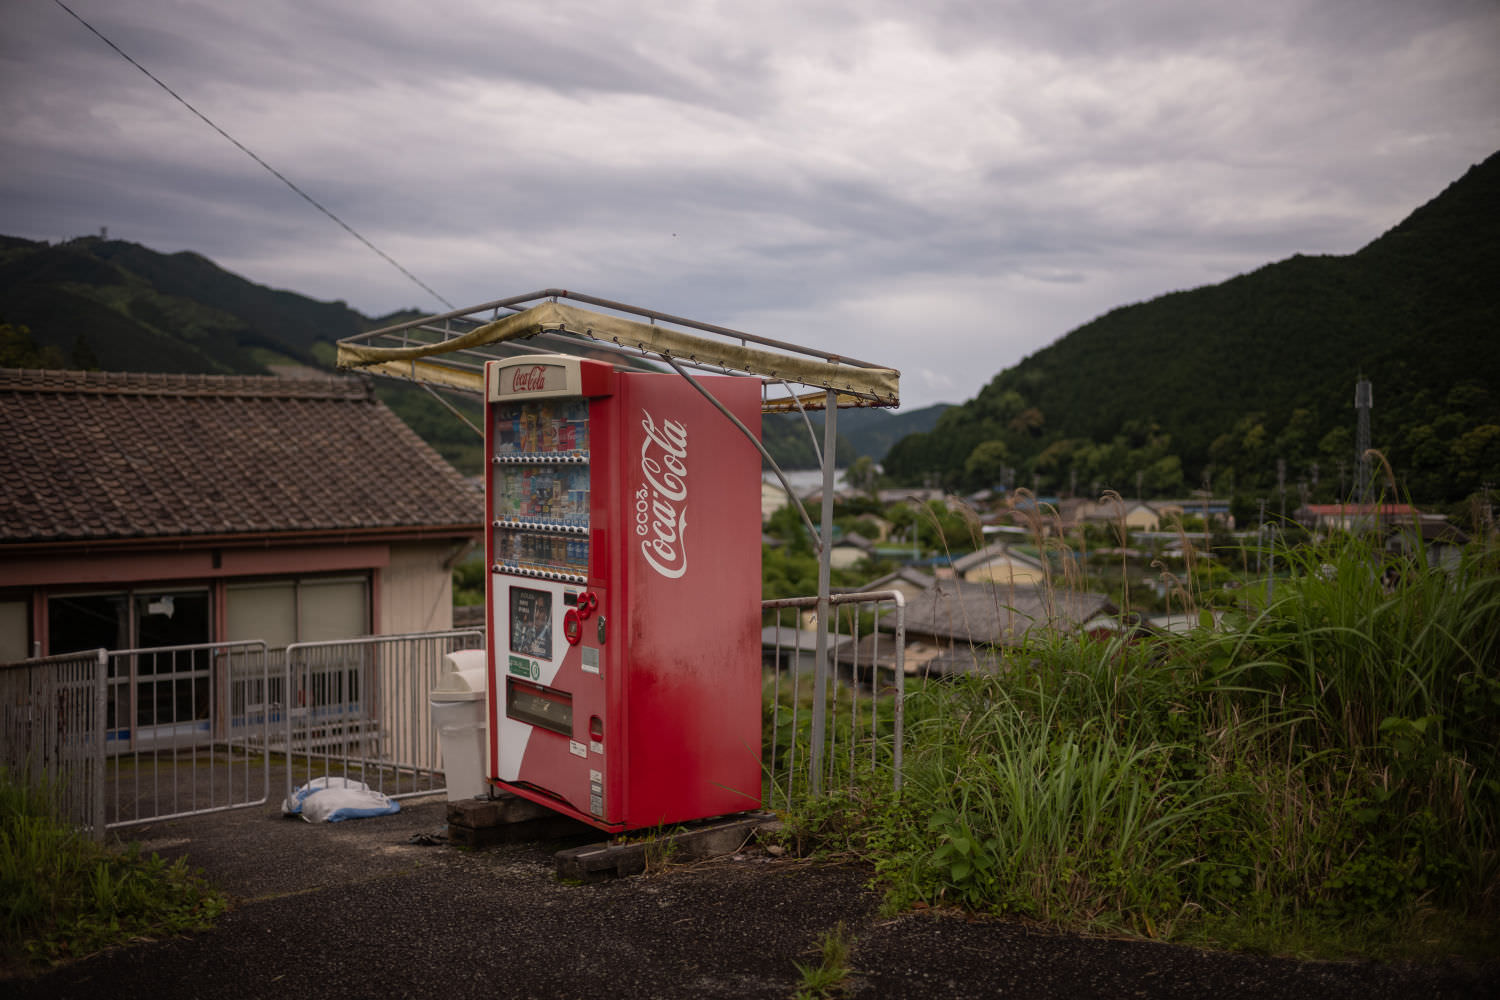 Consider the vending machine lonely on its hill, but, huh, look closely, much delights: Frame once holding up tarp to protect from the elements ripped away by decades of typhoons, now elegant (stitching, gently bent support poles, simple welded joints) crown of sadness for this unsung Hero of Thirst Relief, on side: Roman / Japanese syllabary mix of “ECOã‚‹” â€” roughly, “to Eco,” “to be Eco-friendly,” one assumes of the machine itself, algorithmic energy use for the benefit of earth, drinks cold but ethically cold â€” raised on concrete stilts to be perfectly even (straight bottle drops, no hangs), weeds to the right unkempt (but pleasant), but recycling pails (ECOã‚‹?) to left for cans and bottles in fine shape, sandbags holding half of small fence in place leading down to â€¦ a home? a shed? something uninhabited, and in the distance, the bay, small farming village of Mikisato flanked by mountain passes, unseen but heard: Colossal trucks rumbling back and forth carrying chopped wood and gravel from worksites up and down the coast.
